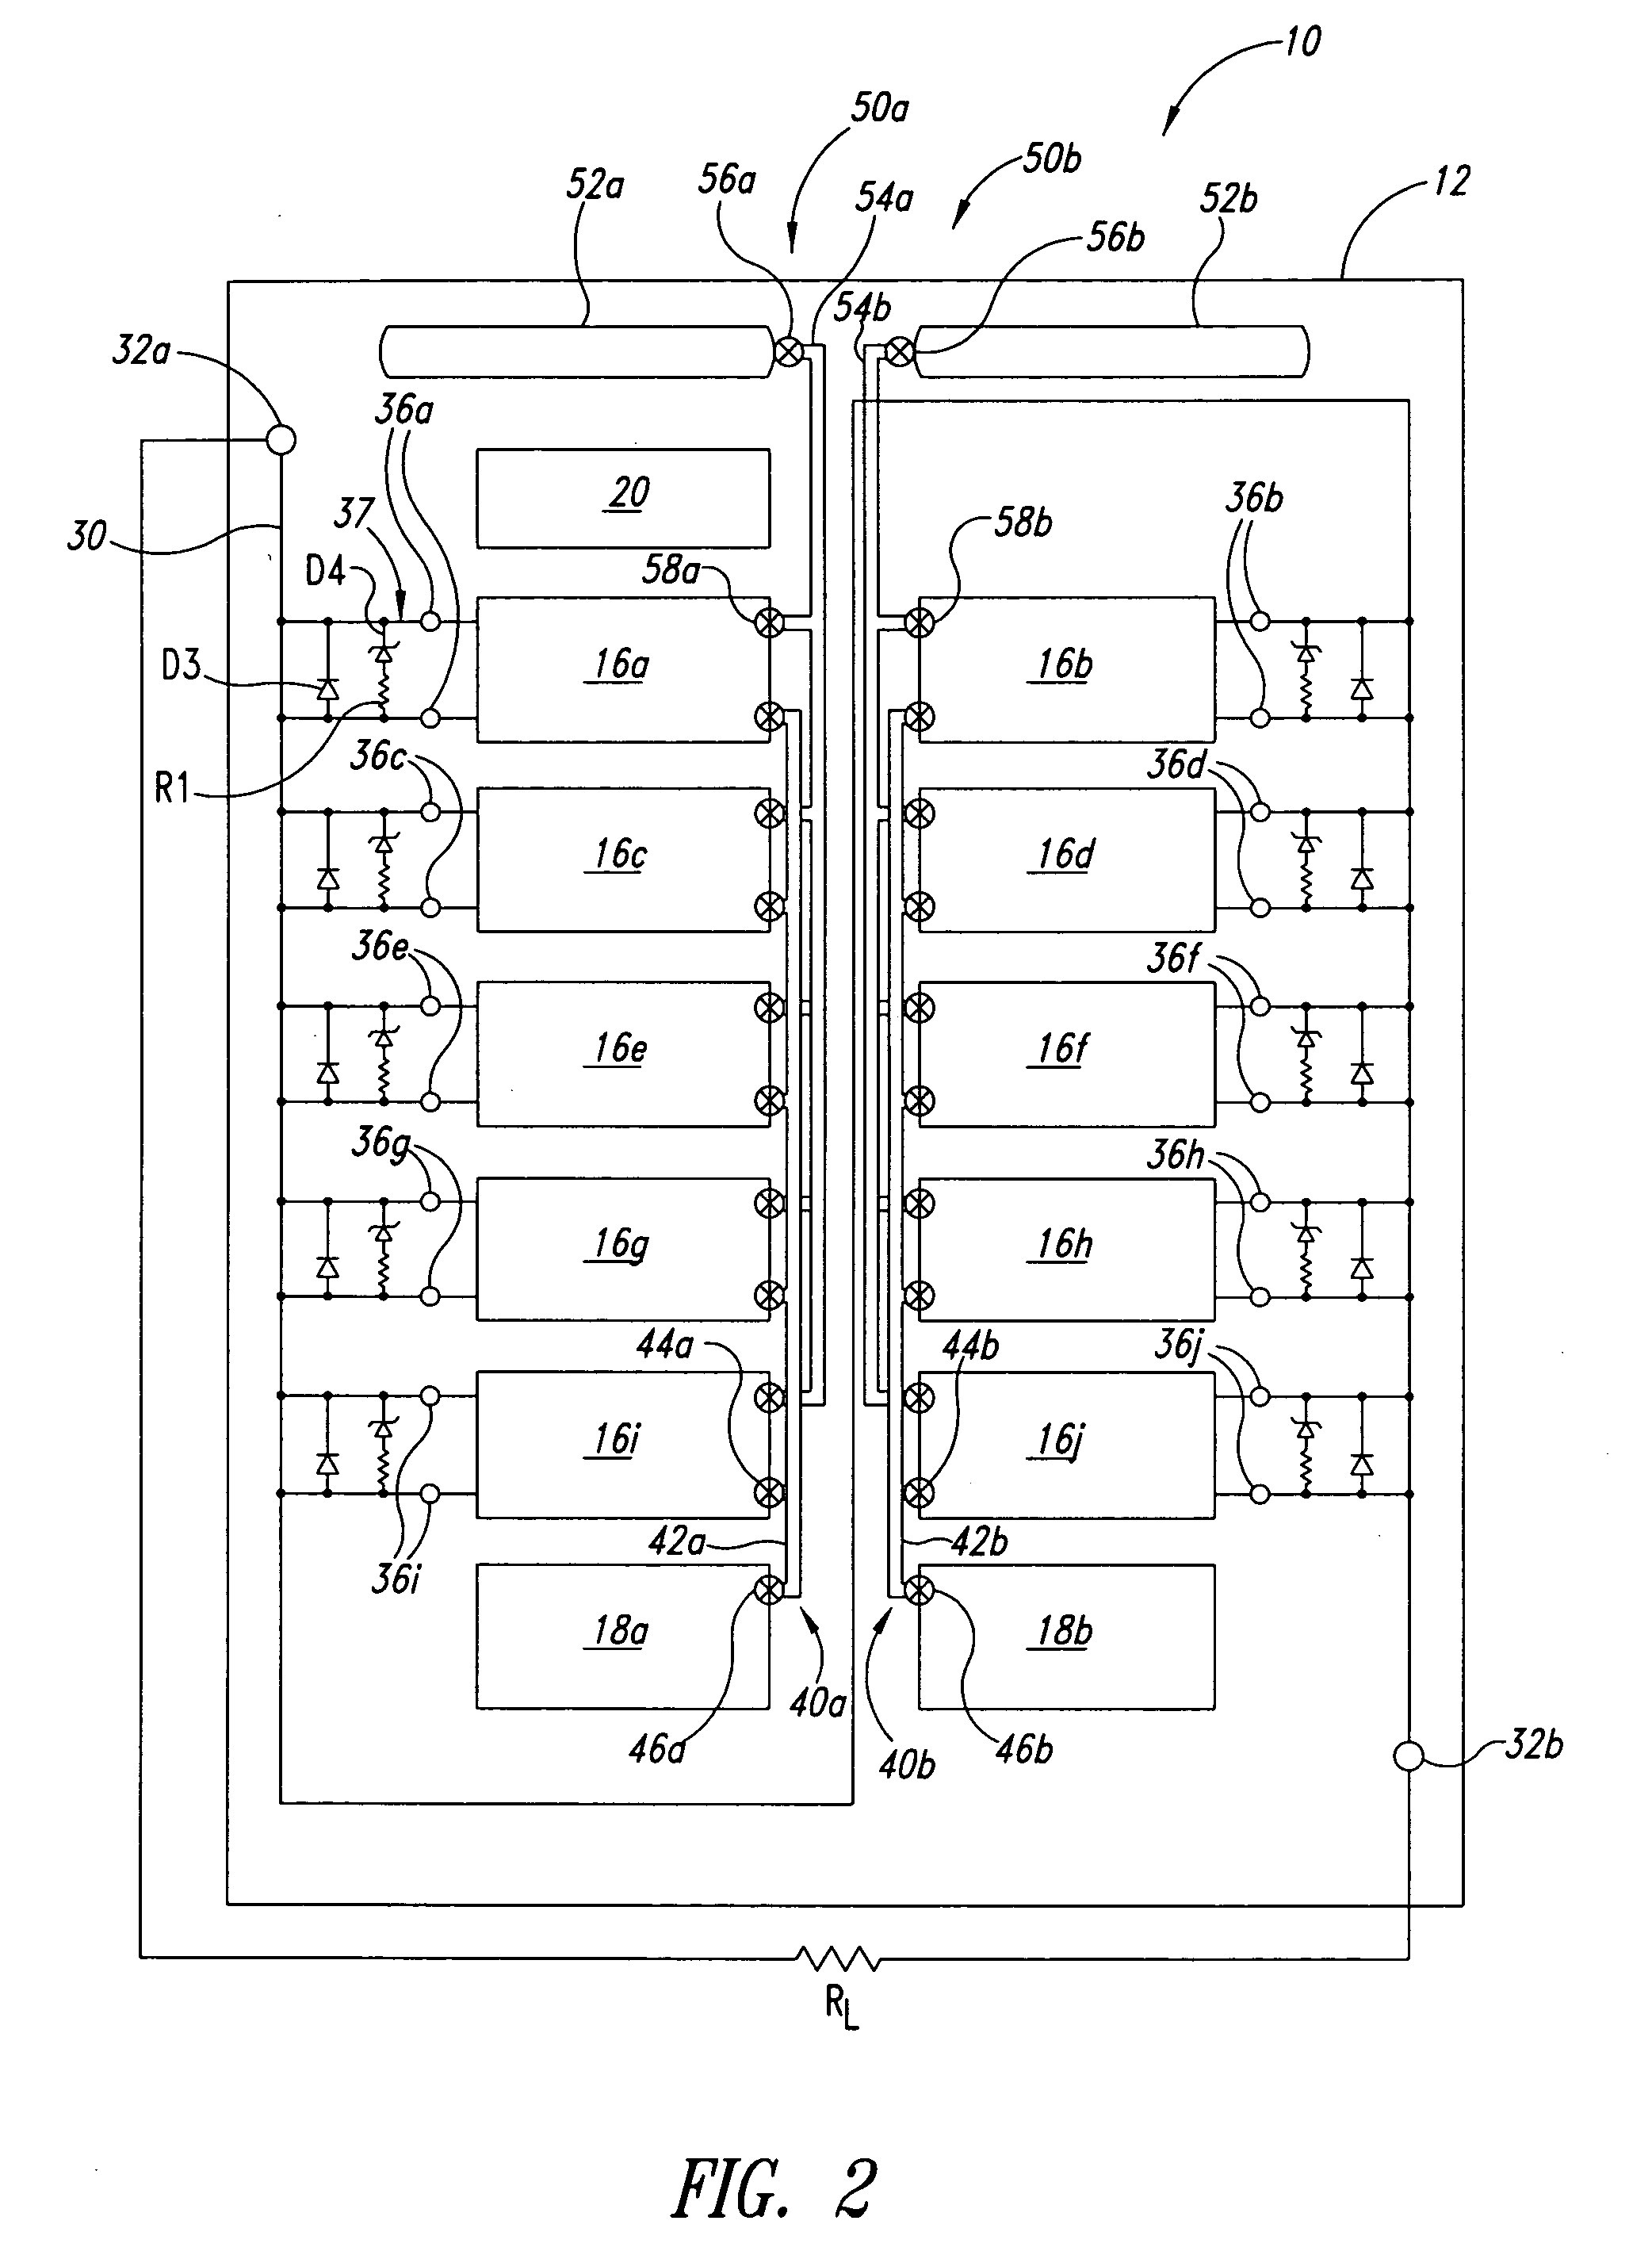 Apparatus and method for hybrid power module systems